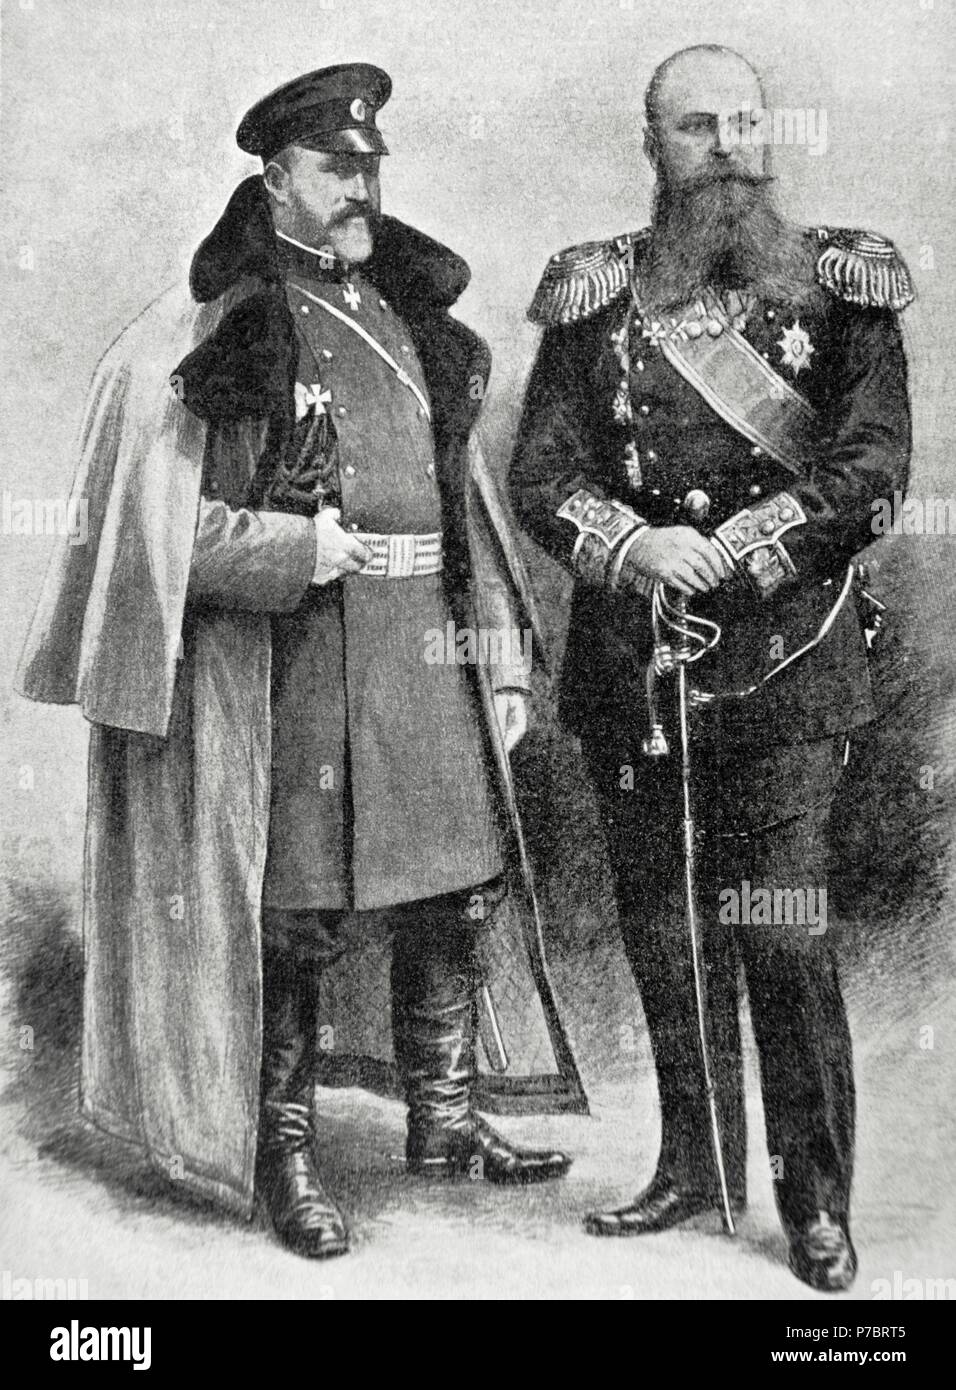 General Alexei Nikolayevich Kuropatkin (1848-1925), Russian Imperial Minister of War and commander-in-Chief of the Russian armies in Manchuria next to Stepan Osipovich Makarov (1849-1904), Russian vice-admiral. Portrait. Engraving in 'La Ilustracion Espanola y Americana', 1904. Stock Photo